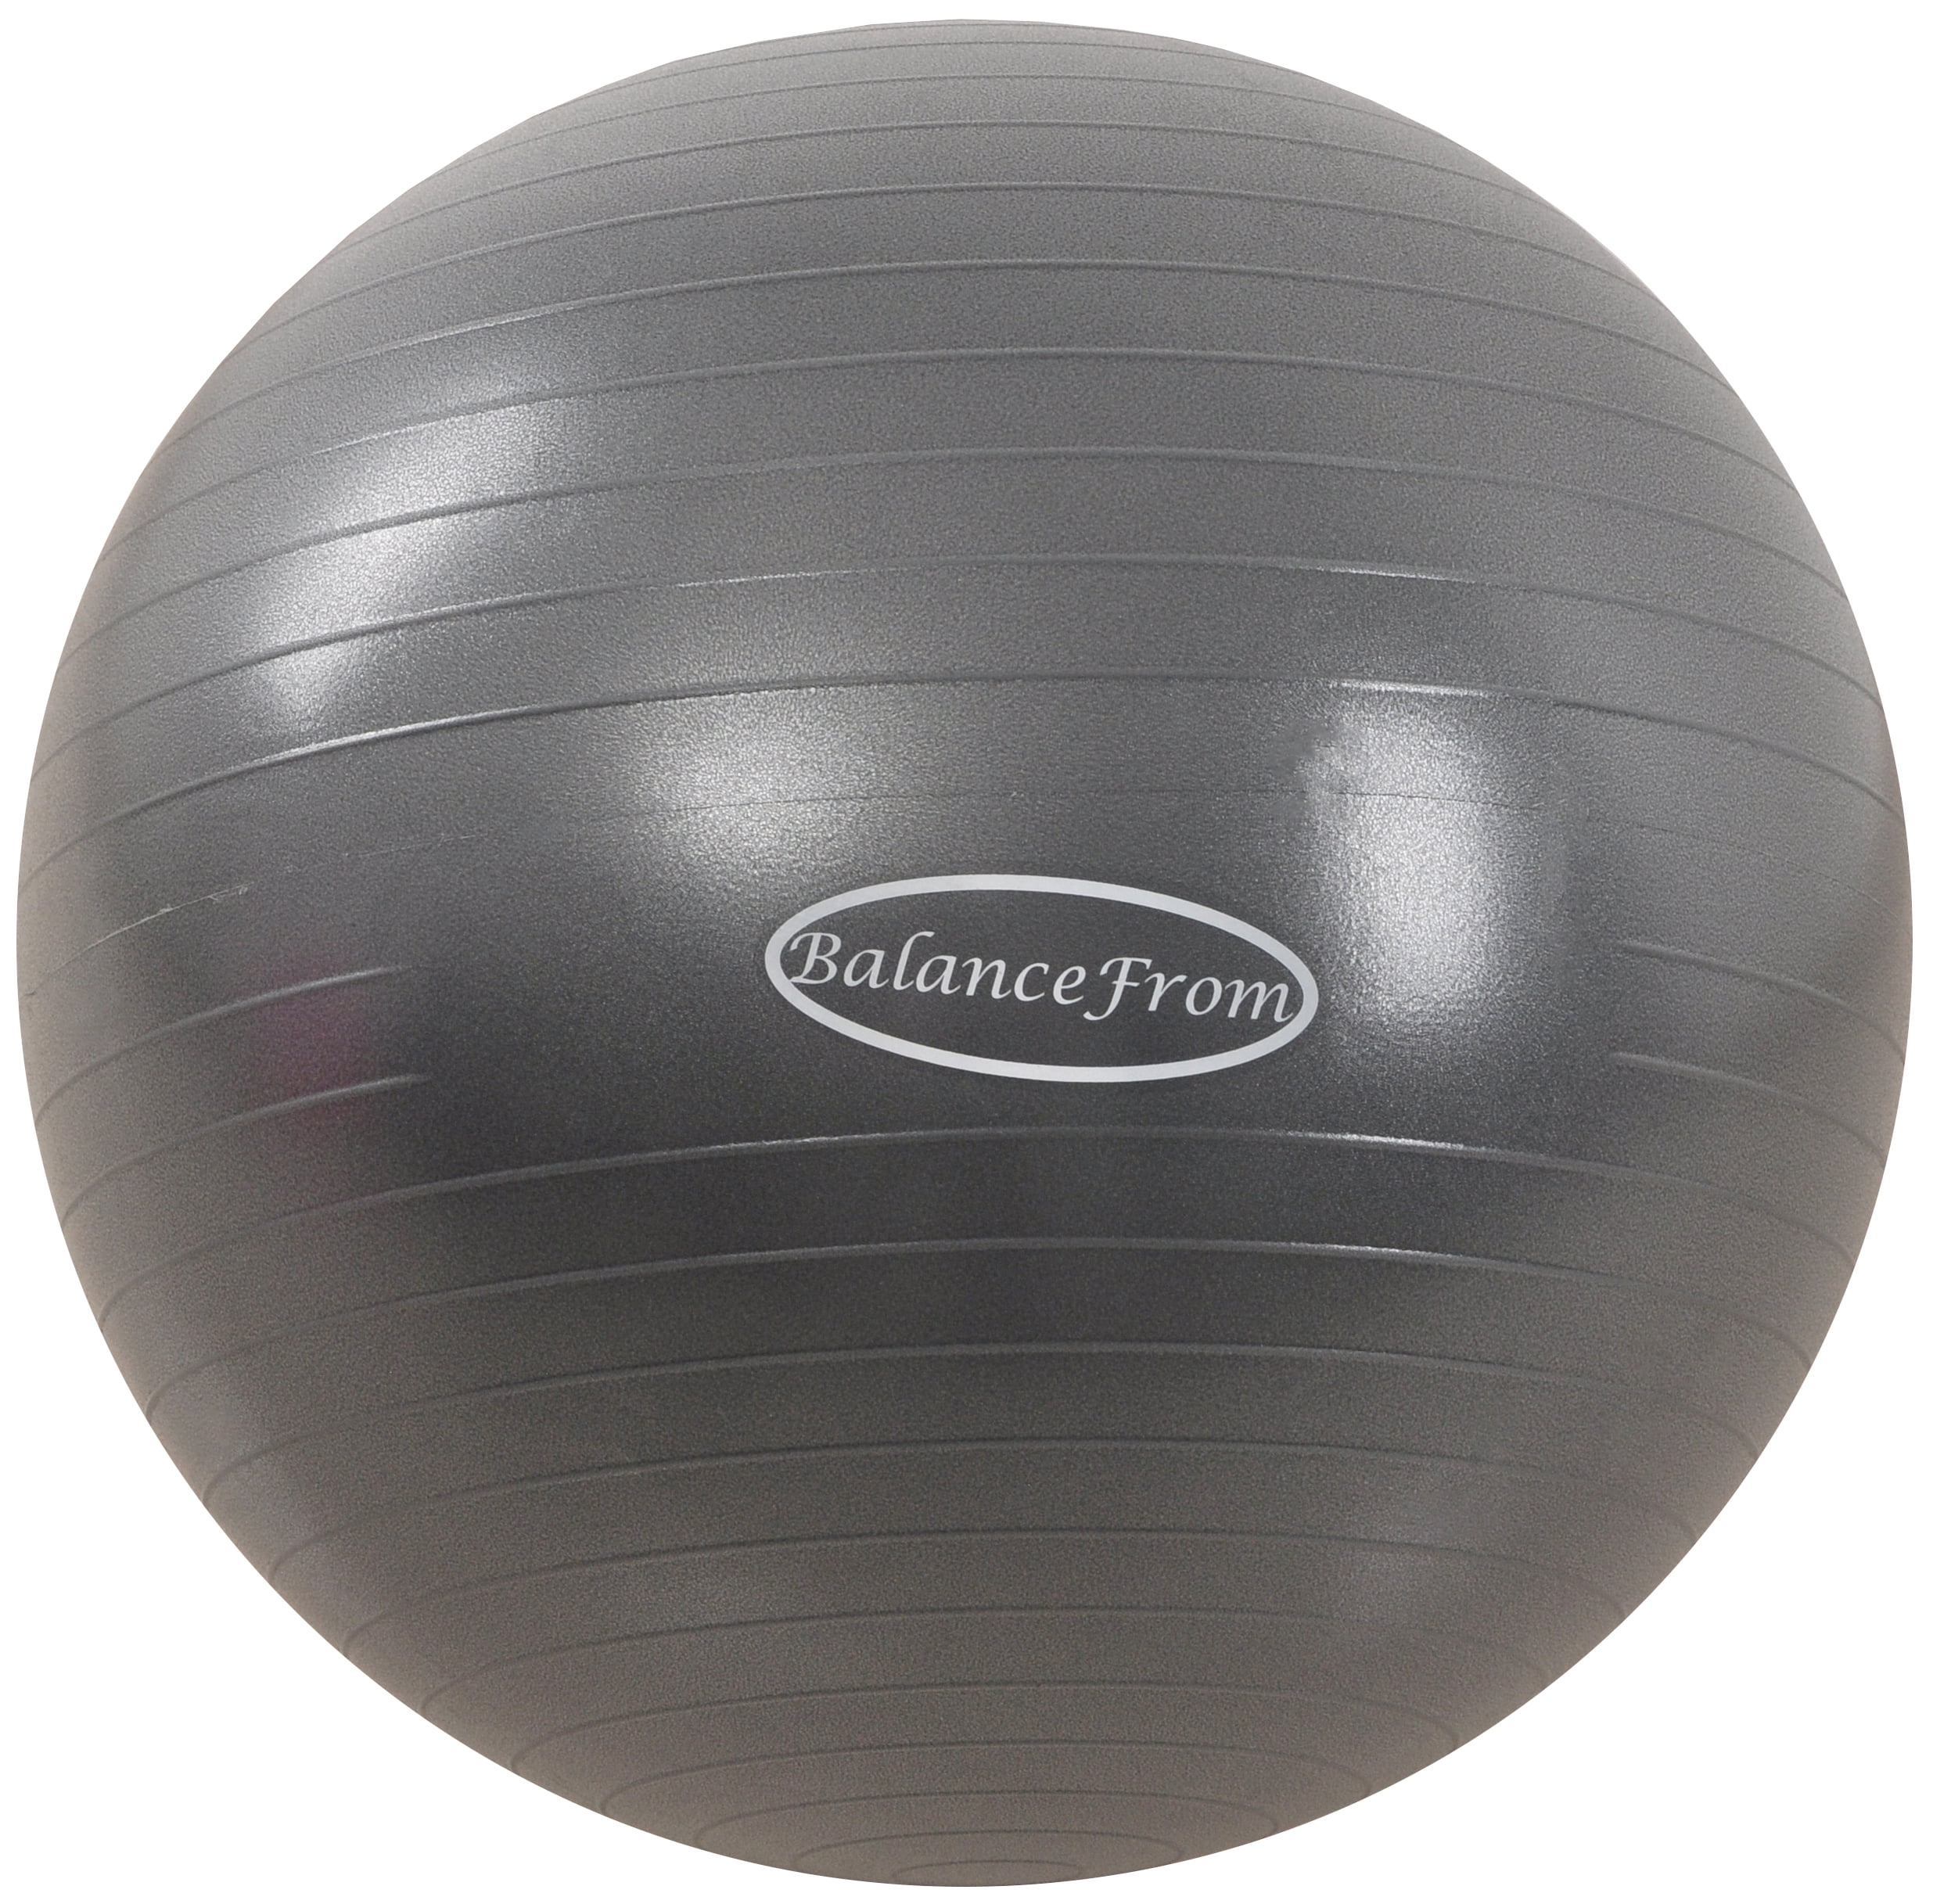 BalanceFrom Anti-Burst and Slip Resistant Exercise Ball Yoga Ball Fitness Ball Birthing Ball with Quick Pump 2,000-Pound Capacity 38-45cm, S, Gray 